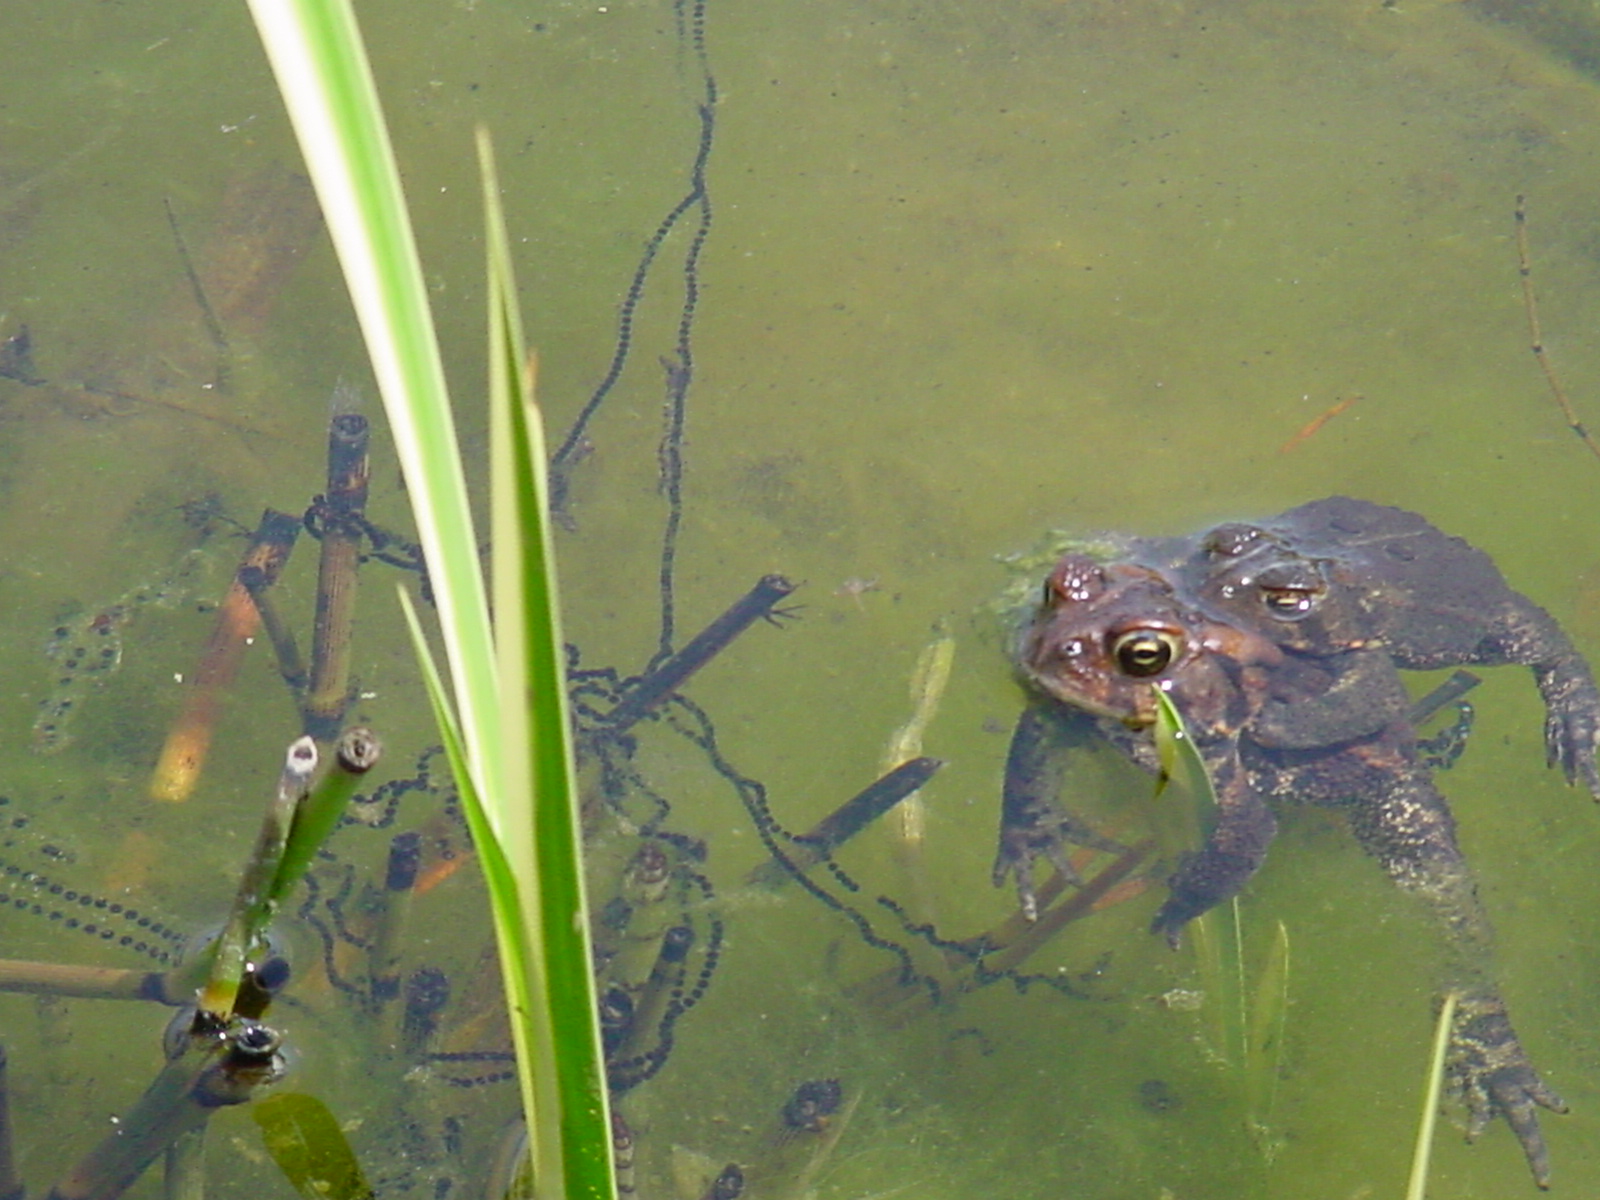 PHOTO: the toad pair are together in the water with a string of black eggs she has laid around the algae.